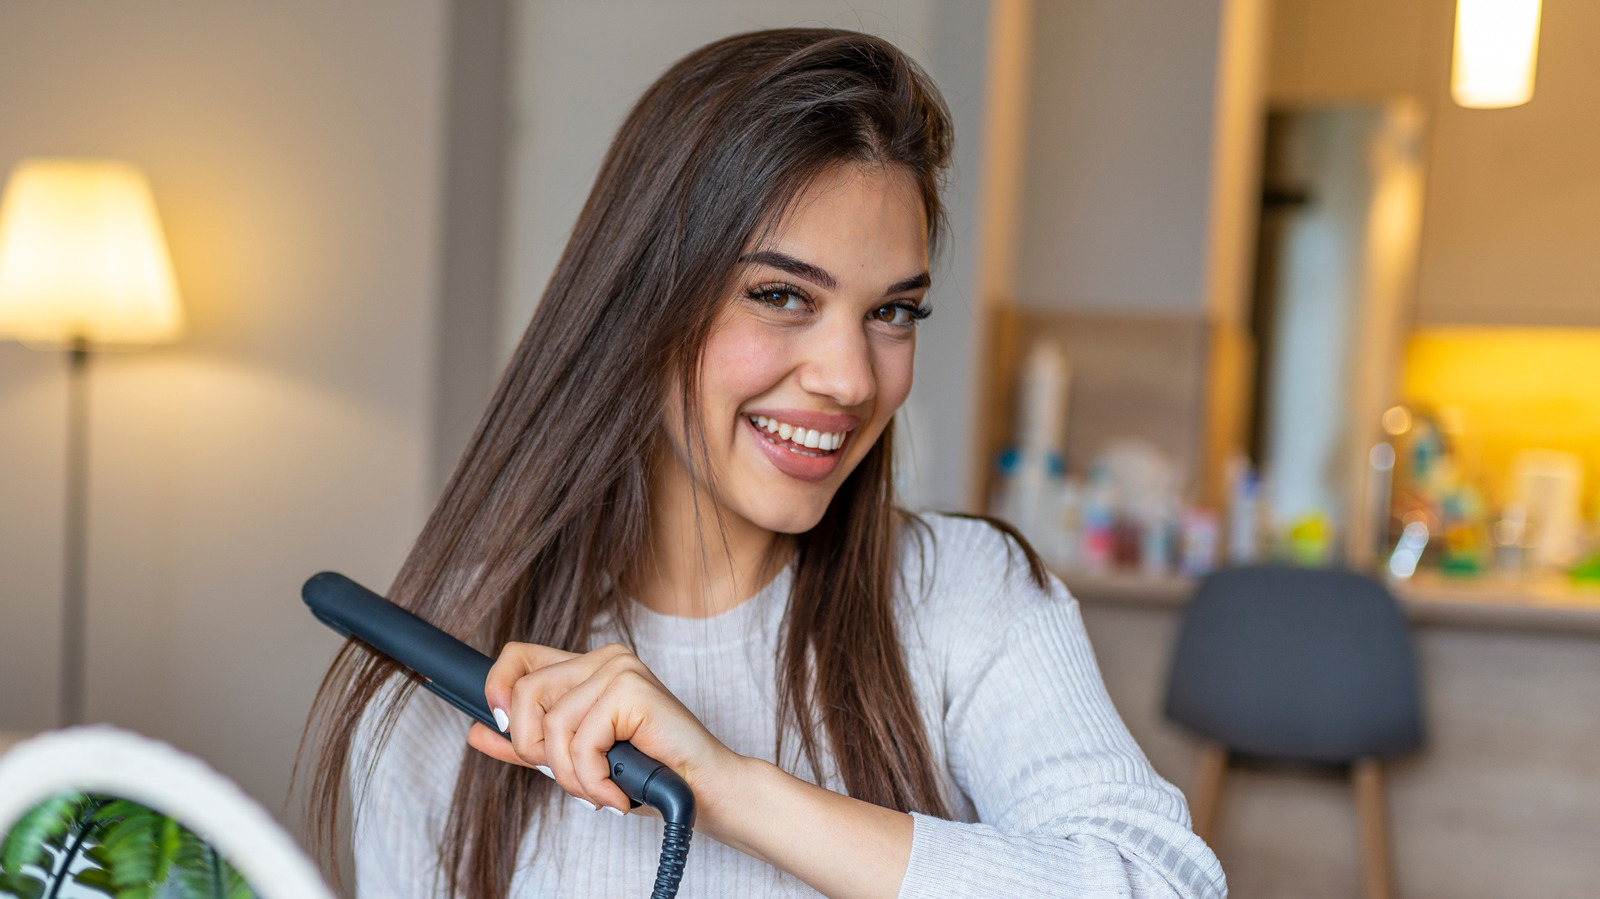 How should you choose a hair straightener?